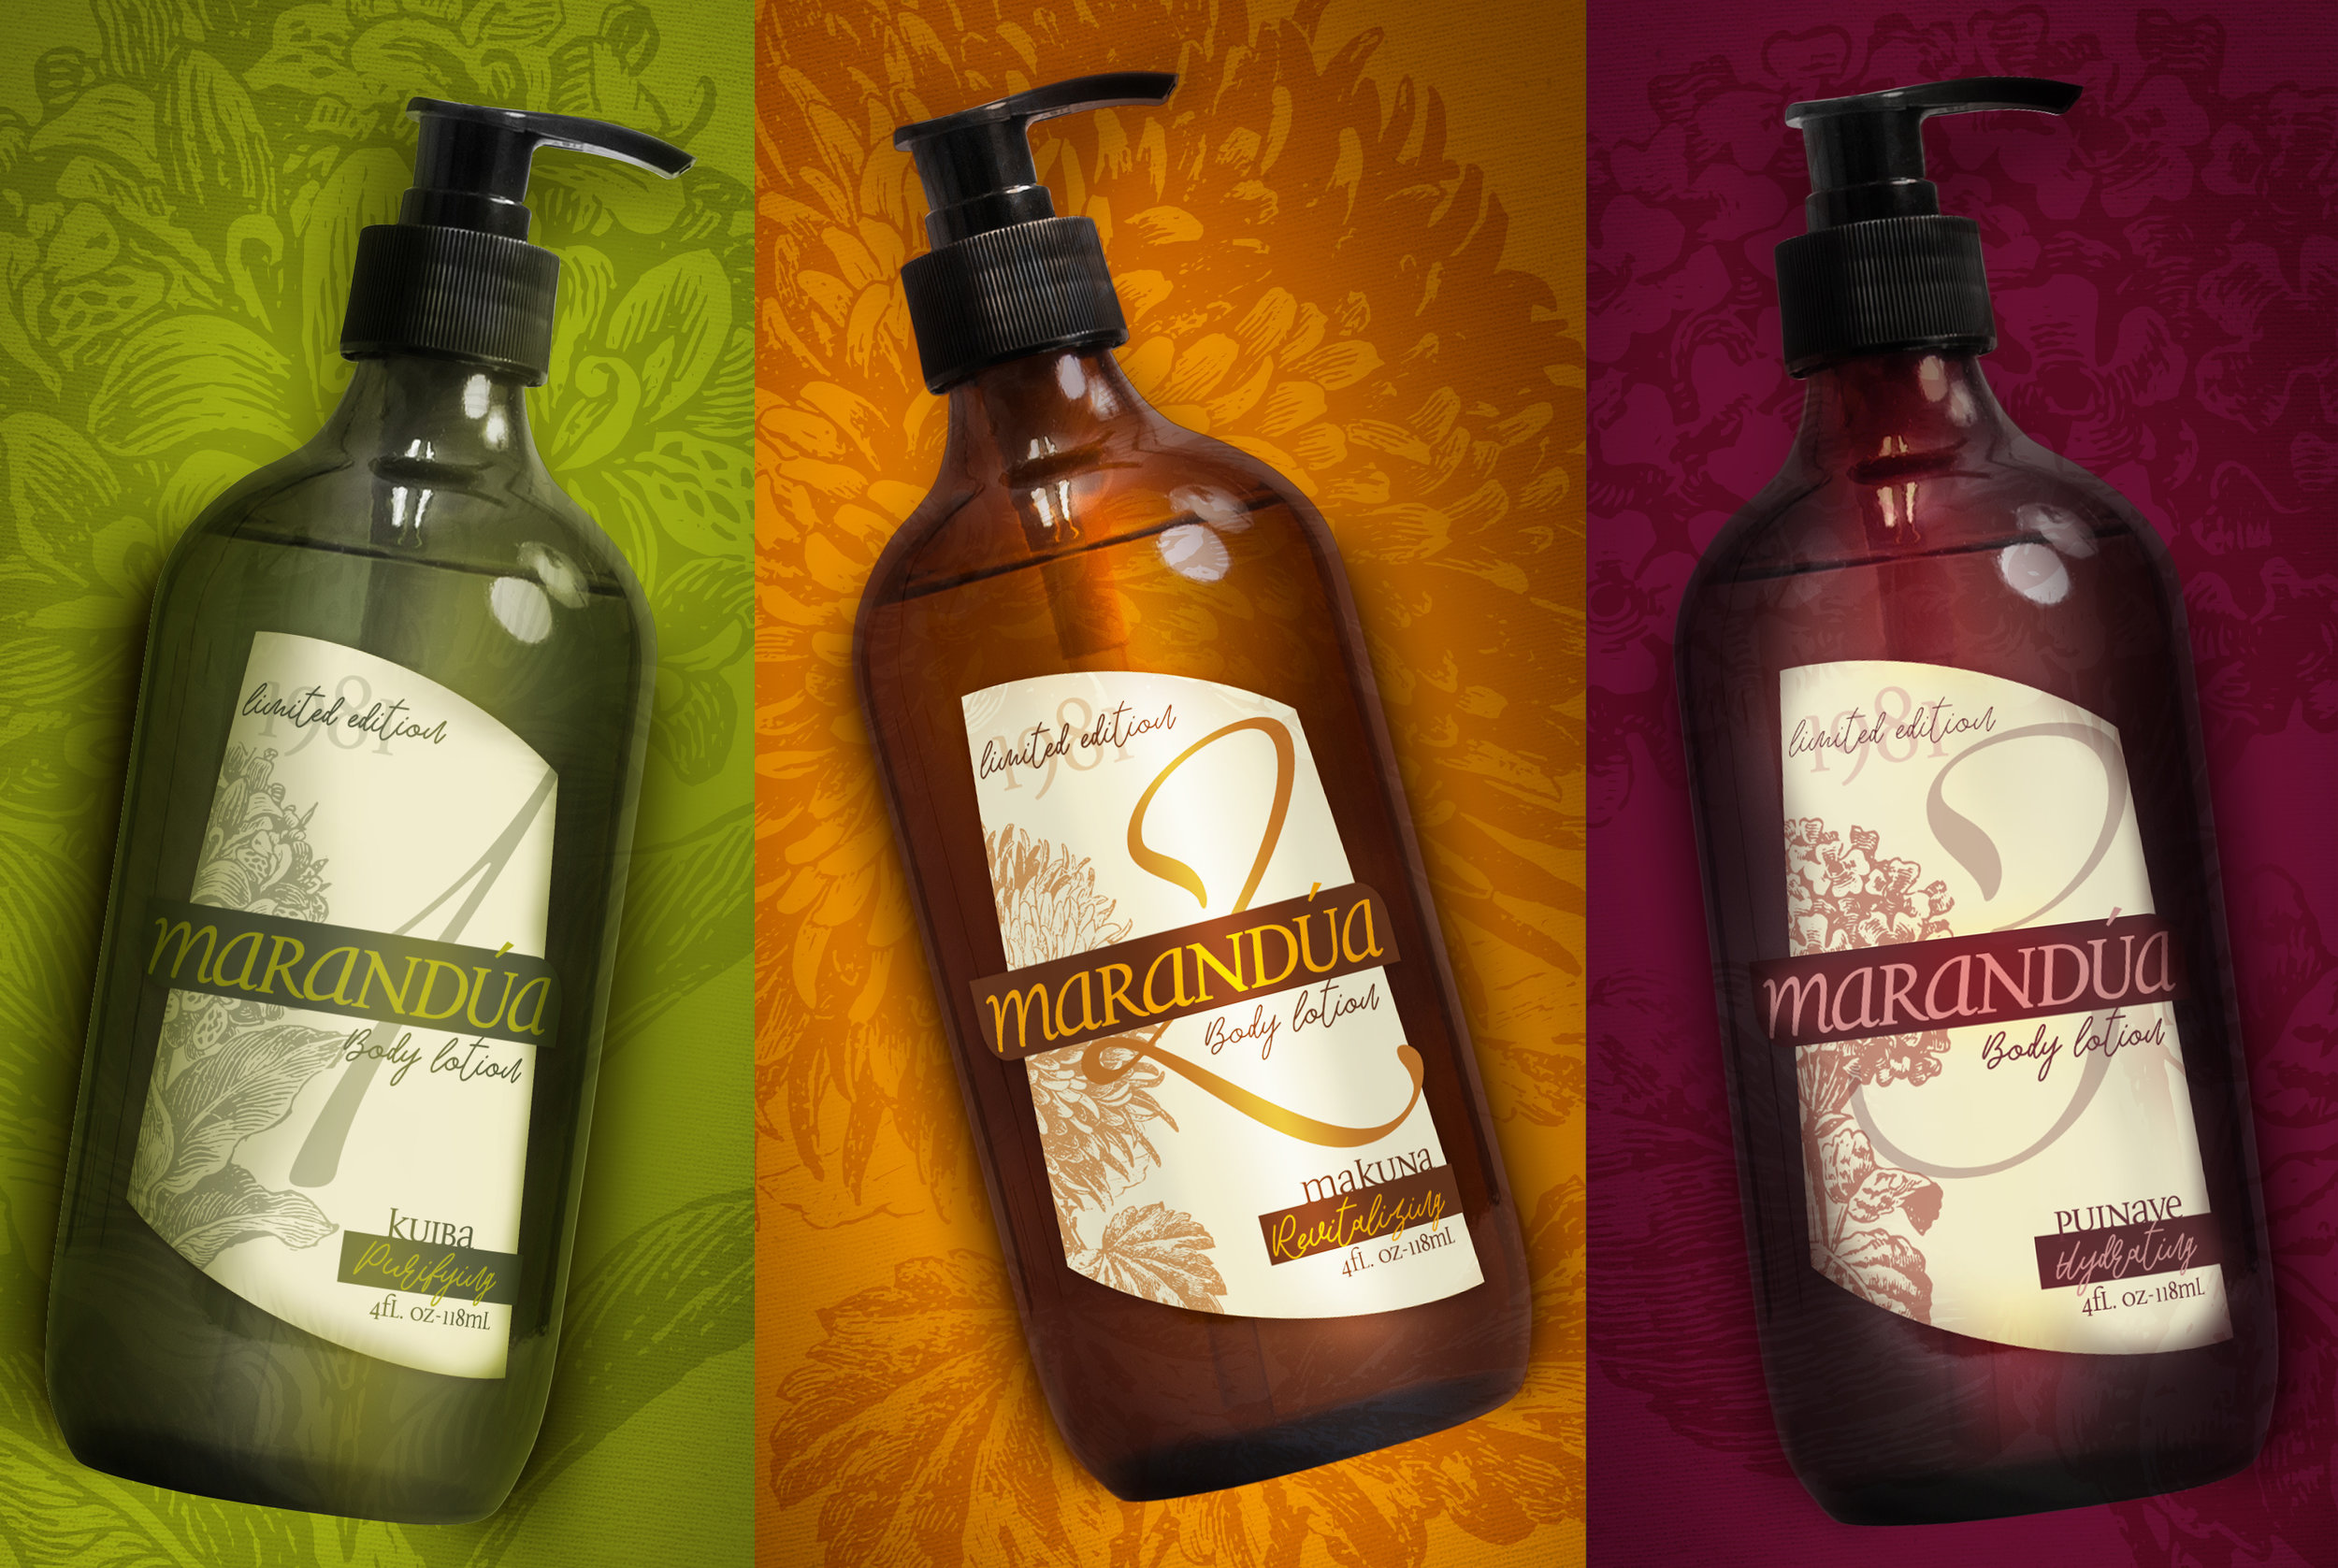 Brand Creation and Packaging for Limited Edition for Body Lotions from Colombian